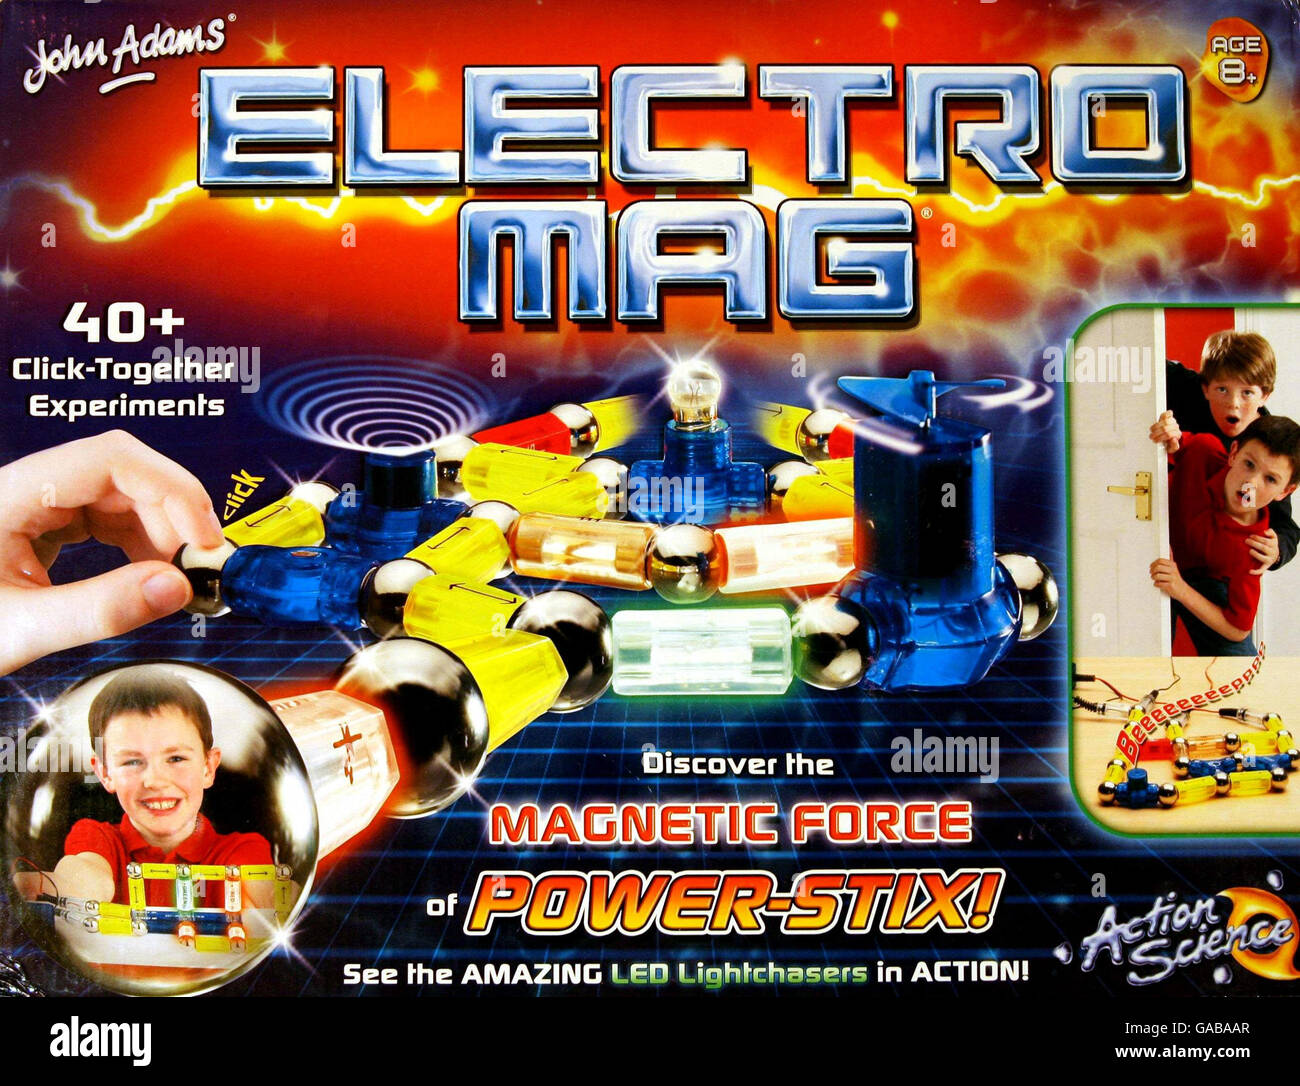 View of the box for Electro Mag, a retro science kit which gives children an insight into the world of electronics and gadgets and which has been named as the Science Museum's Smart Toy of the Year 2007. Stock Photo